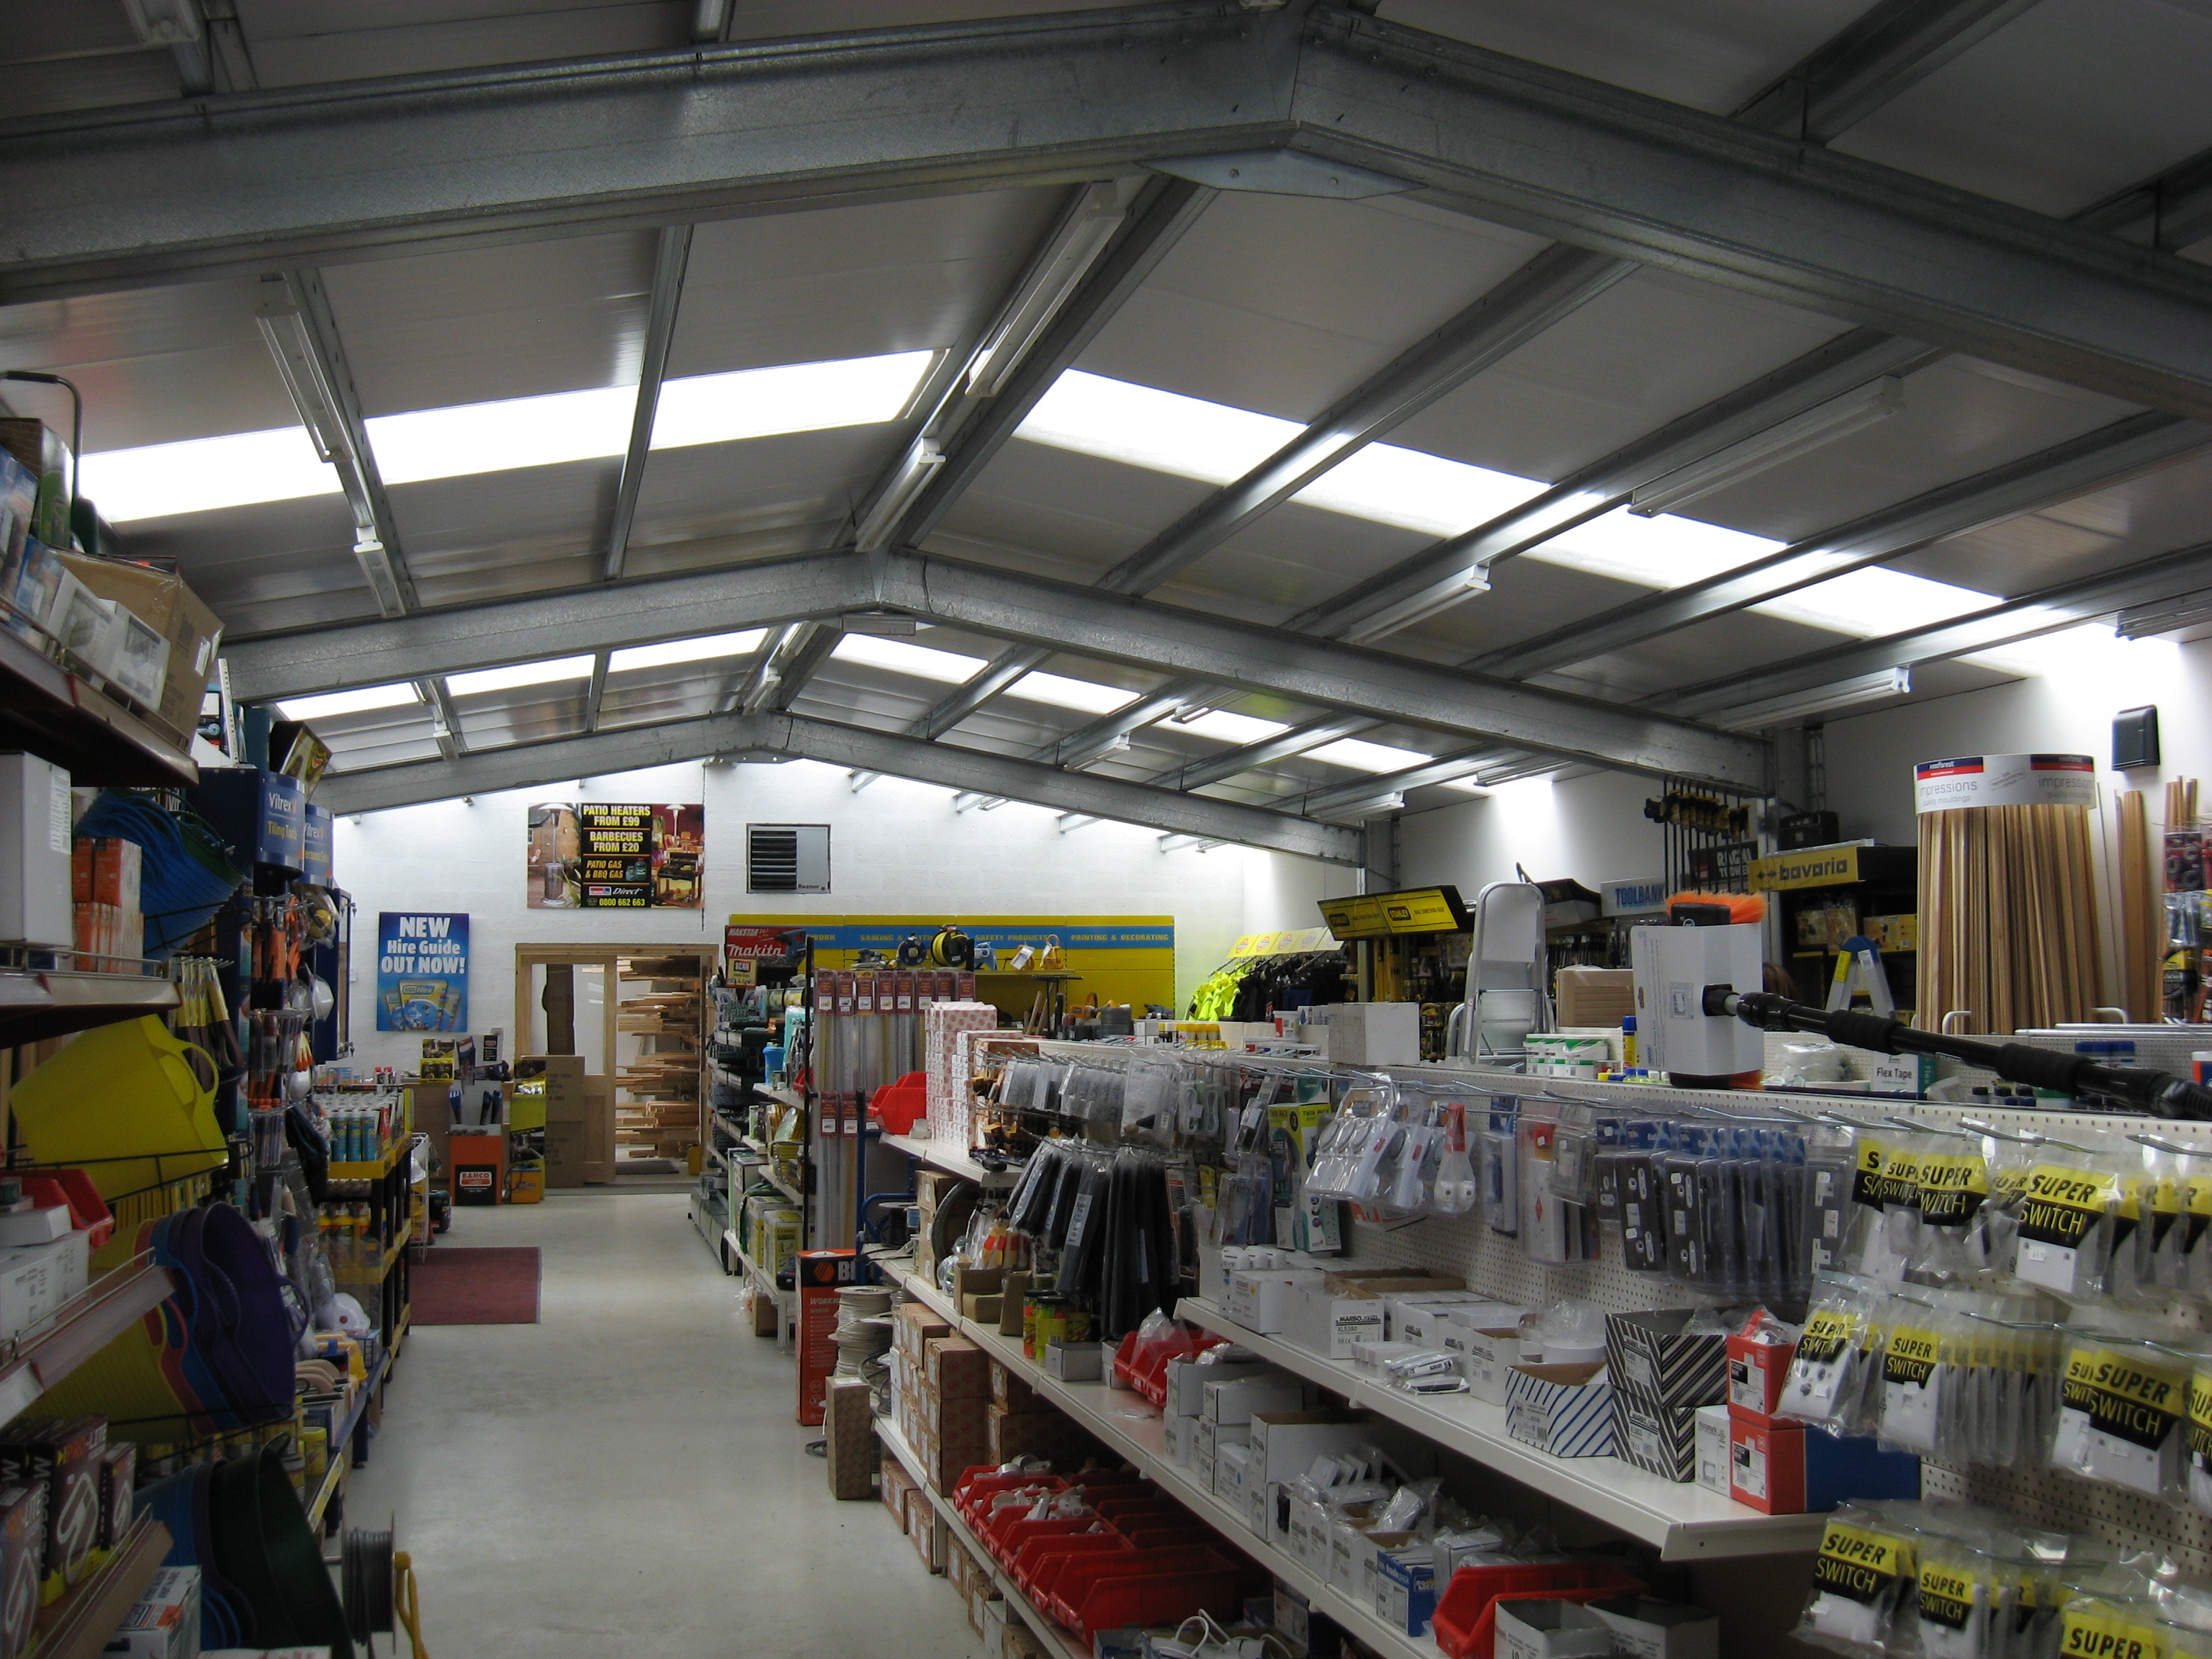 Commercial Steel Buildings For Retail Outlet In The UK